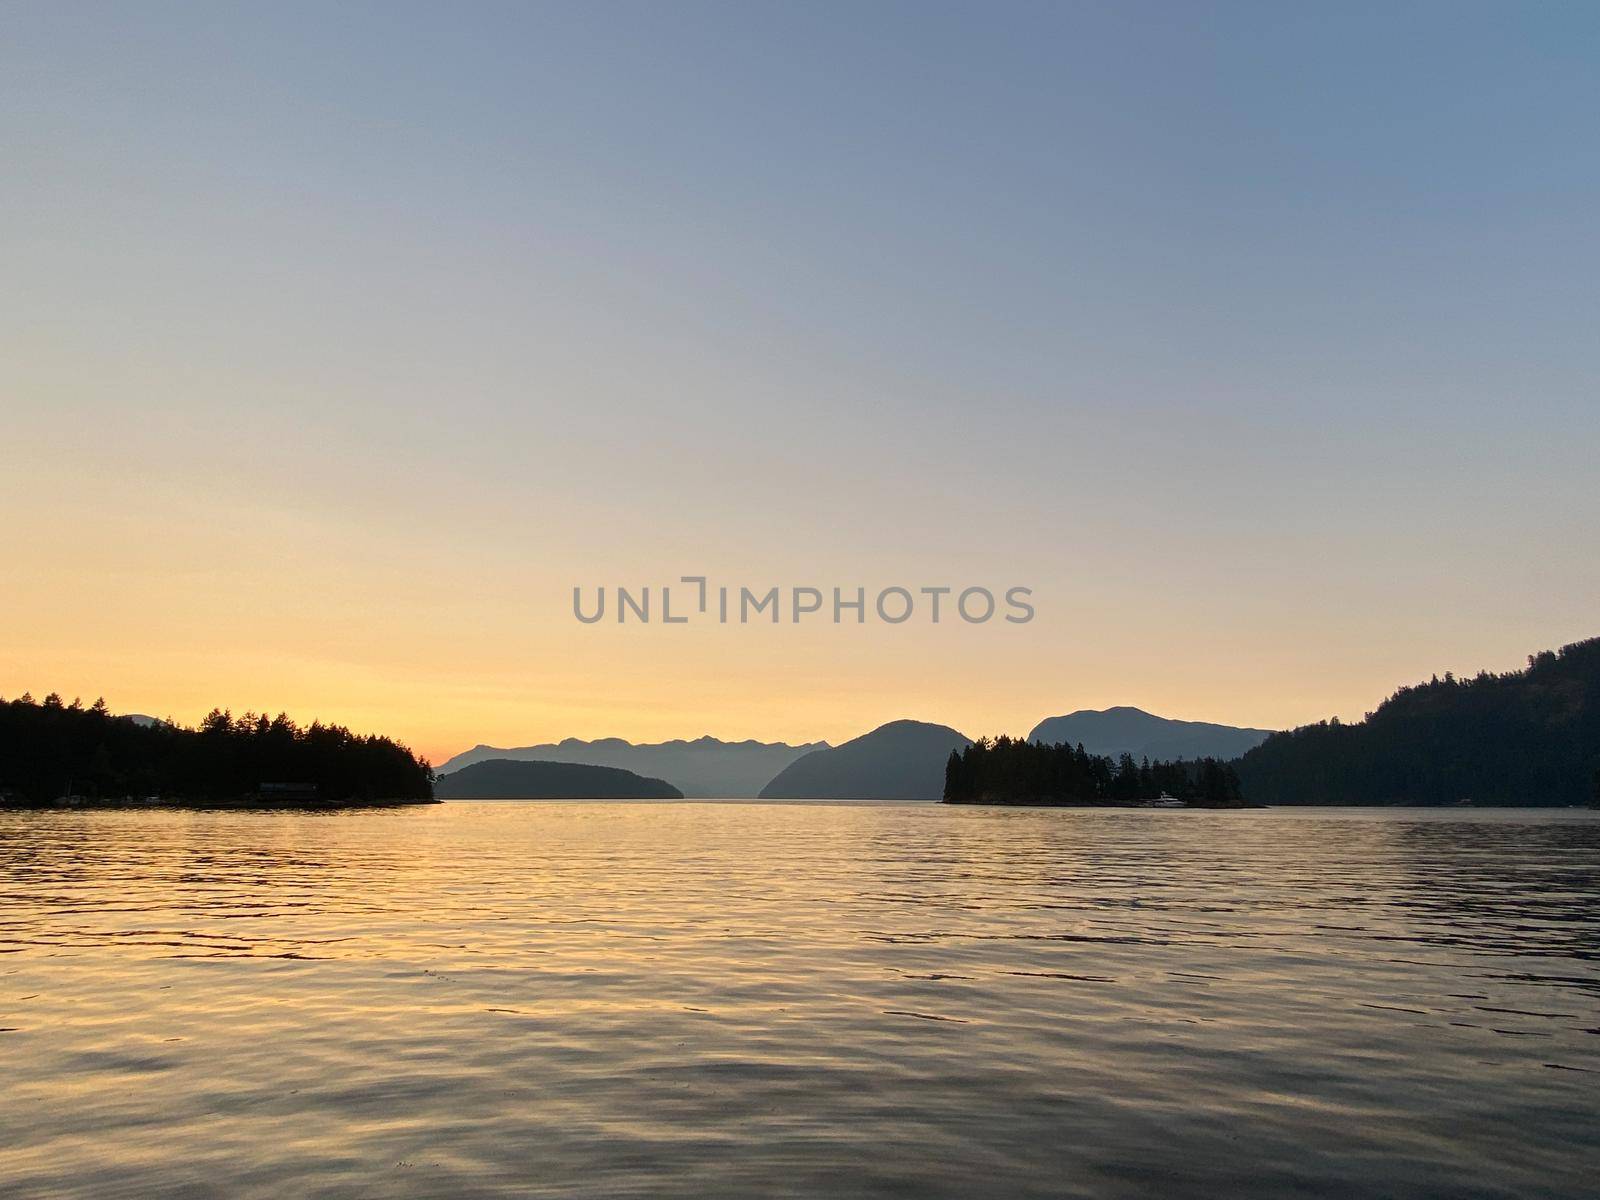 Sunset scene over mountains with reflection on water, near Thetis Island, Vancouver Island, British Columbia, Canada